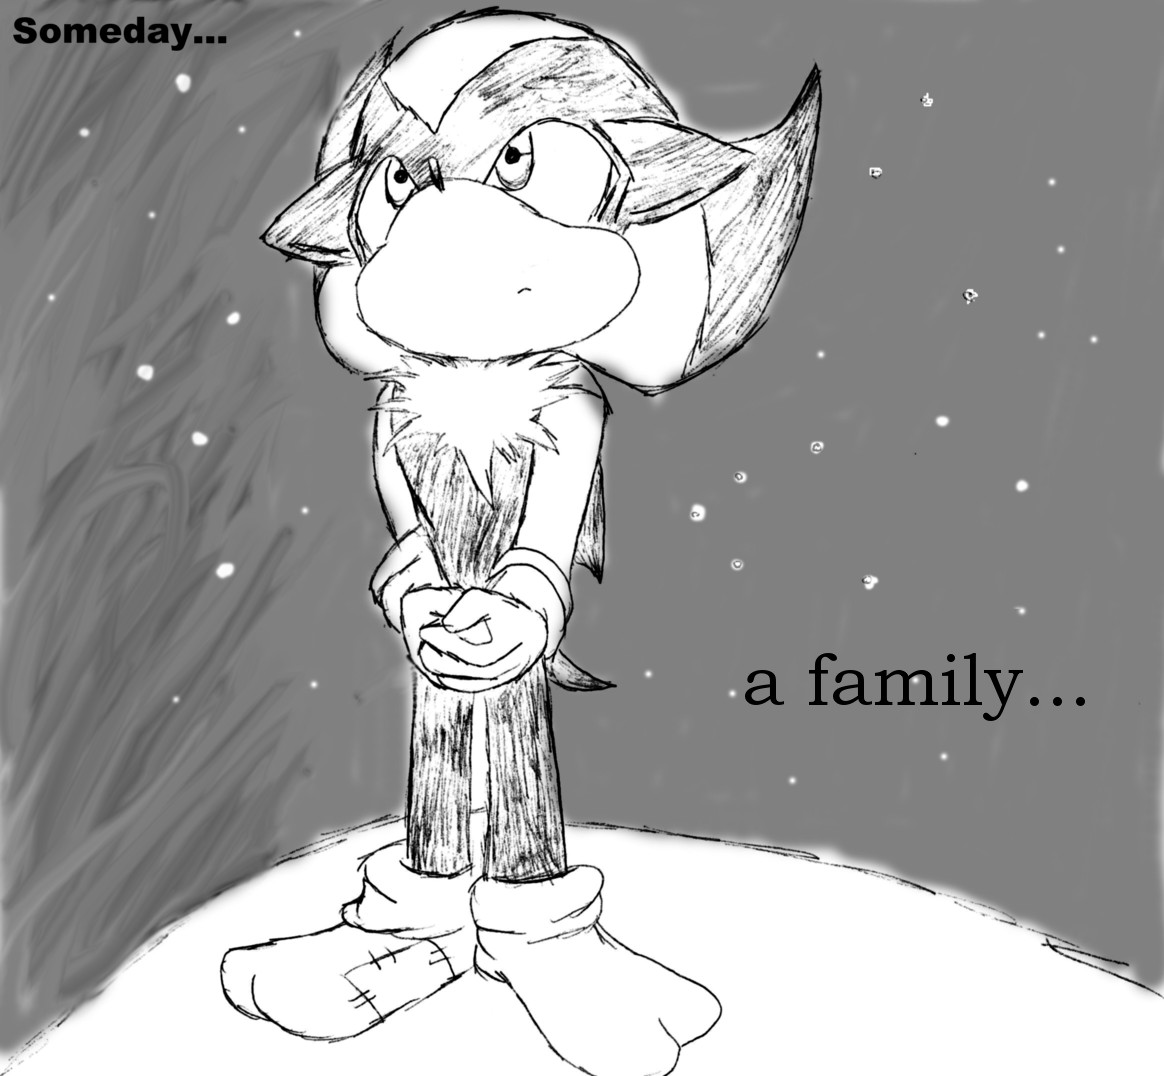 Someday... a Family by TheGameArtCritic